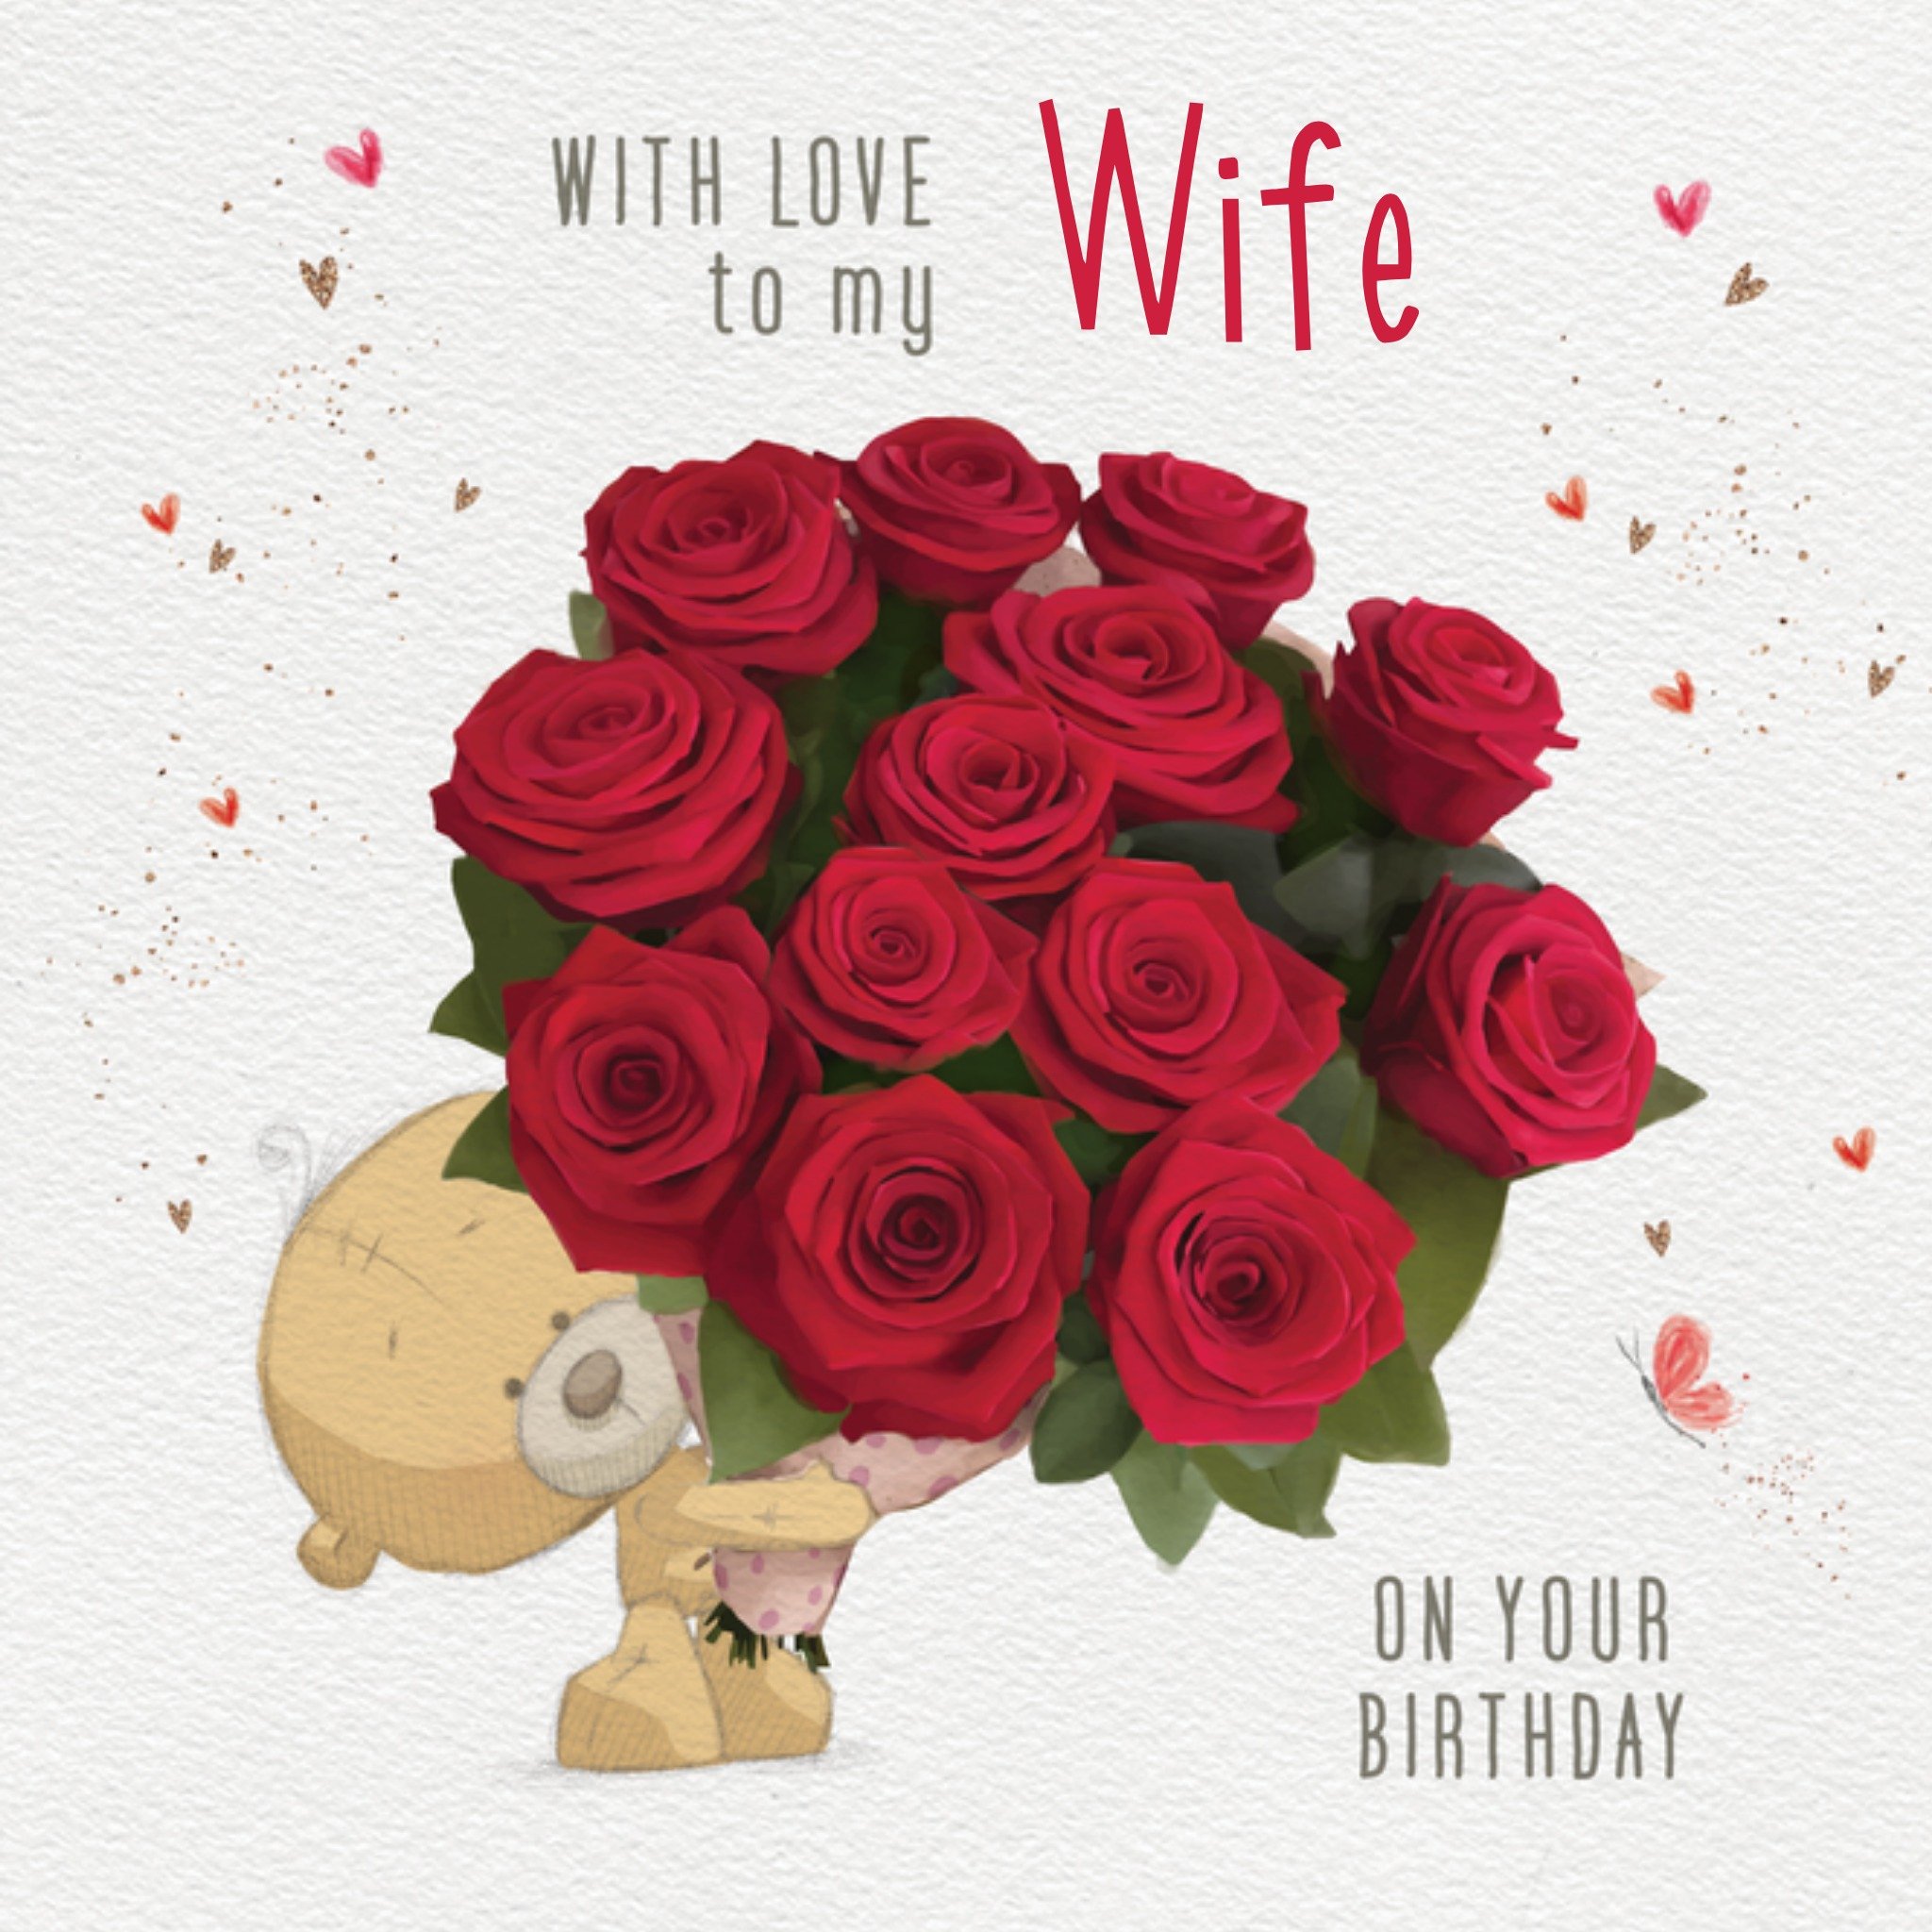 Moonpig Uddle With Love To My Wife Illustrated Teddy With Bouquet Of Roses Birthday Card, Square